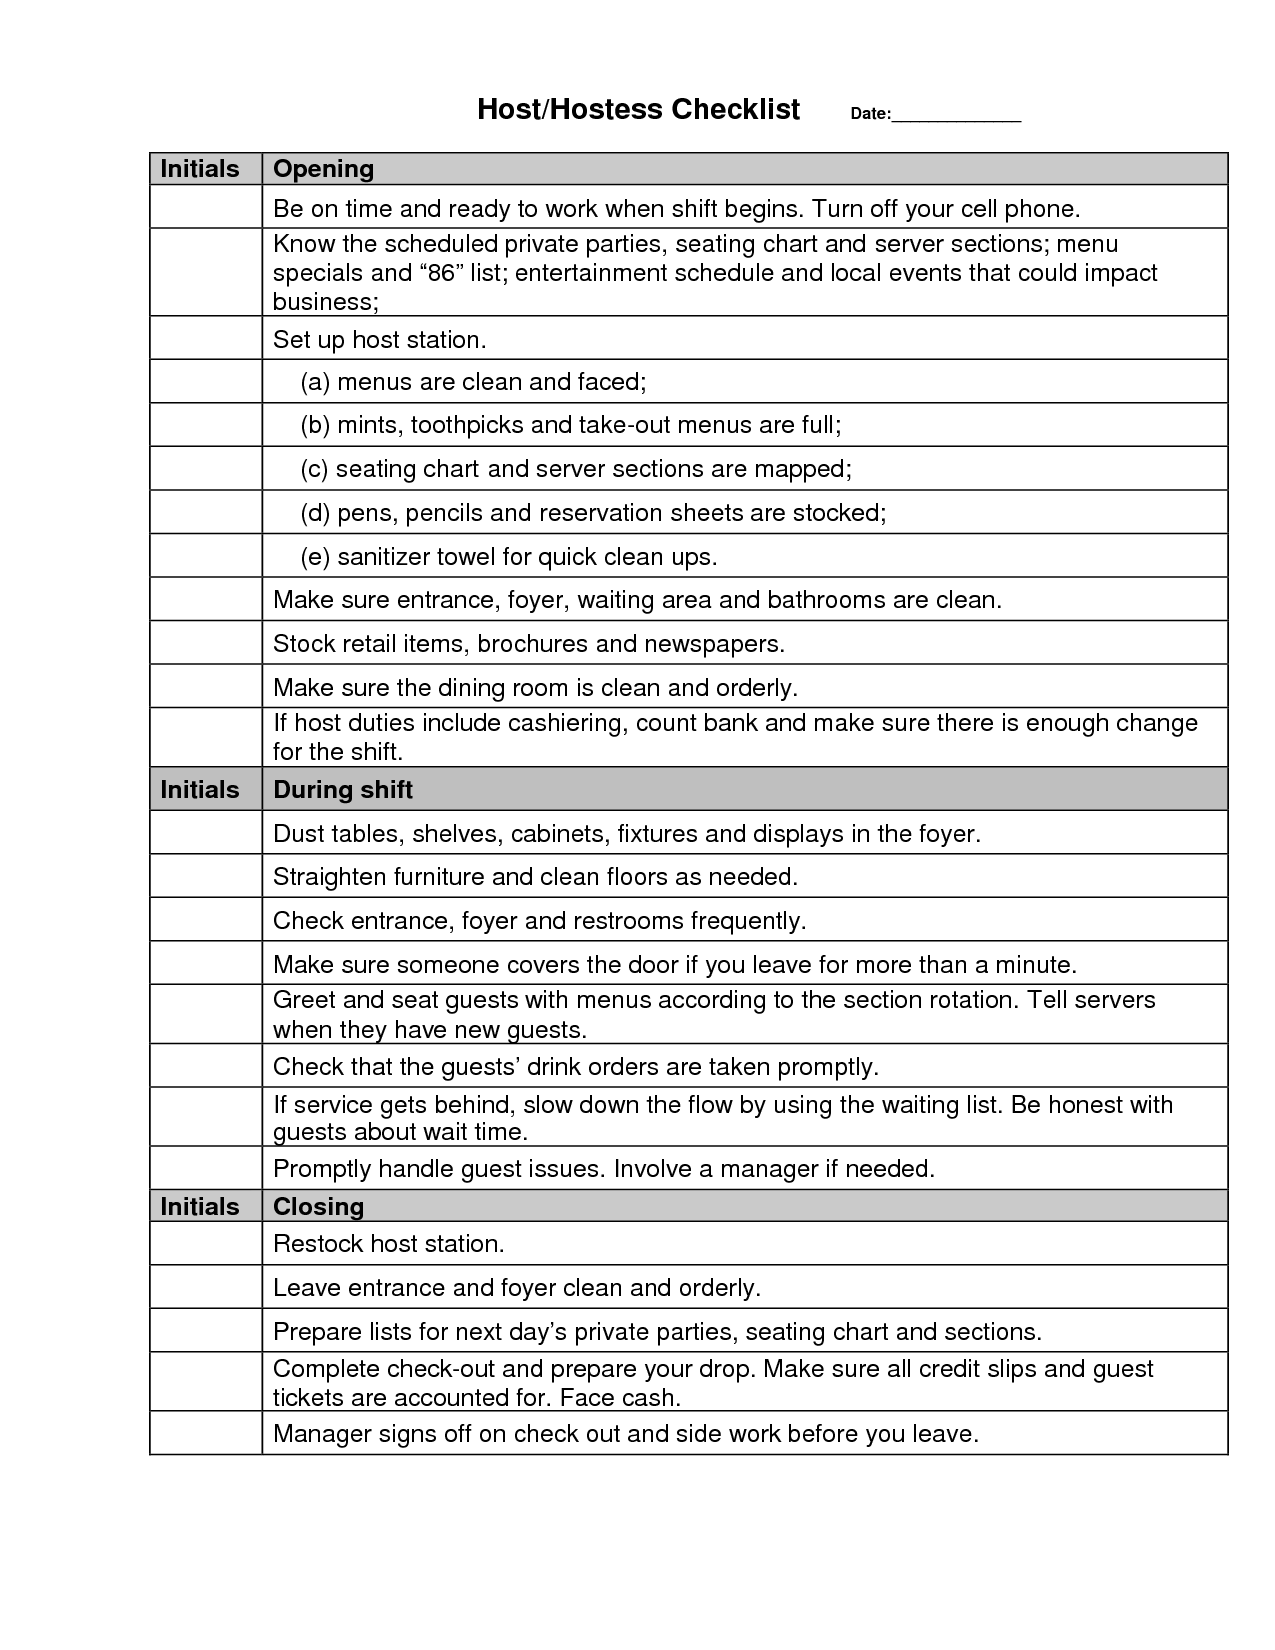 Tribal Tattoos X: Checklist Tattoo Shop Inventory List Intended For Restaurant Side Work Checklist Template Within Restaurant Side Work Checklist Template